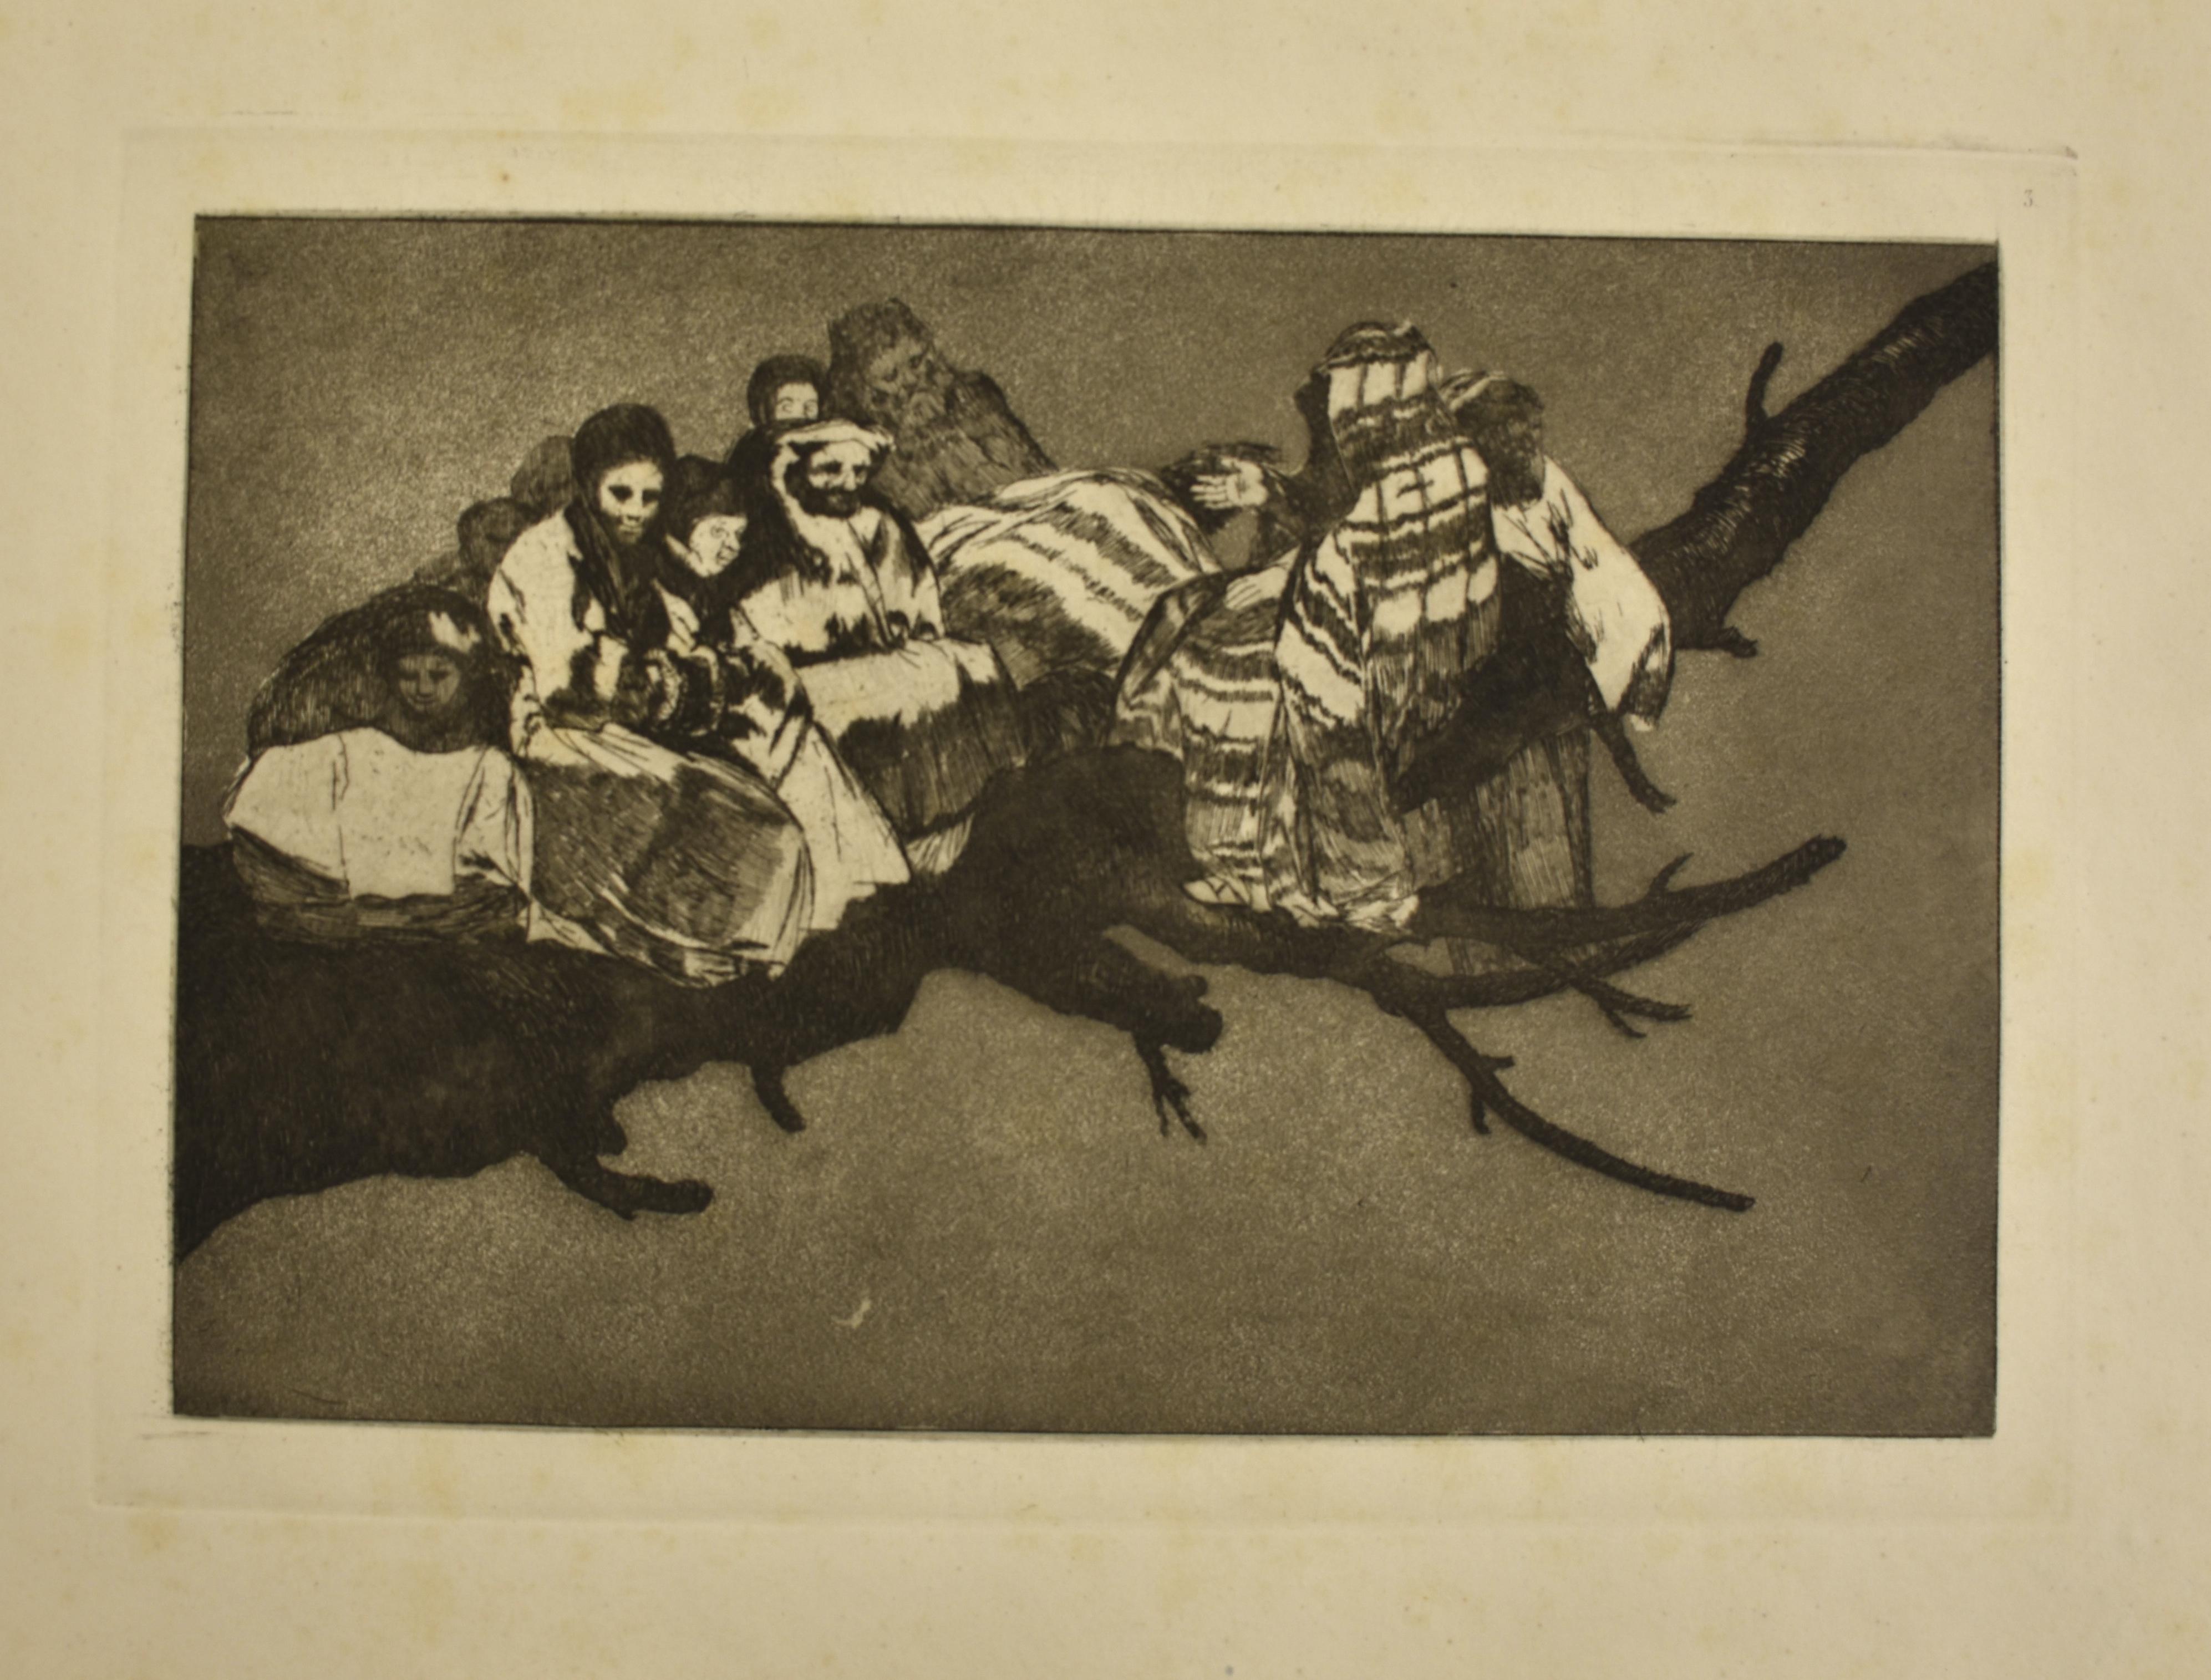 Complete and homogeneous series of 18 plates (black and white etching and aquatint), in loose sheets, of the second edition of the famous work by Goya (1746-1828), edited in 1875 by the Real Academia of Fine Arts in San Fernando, Madrid.

Rare